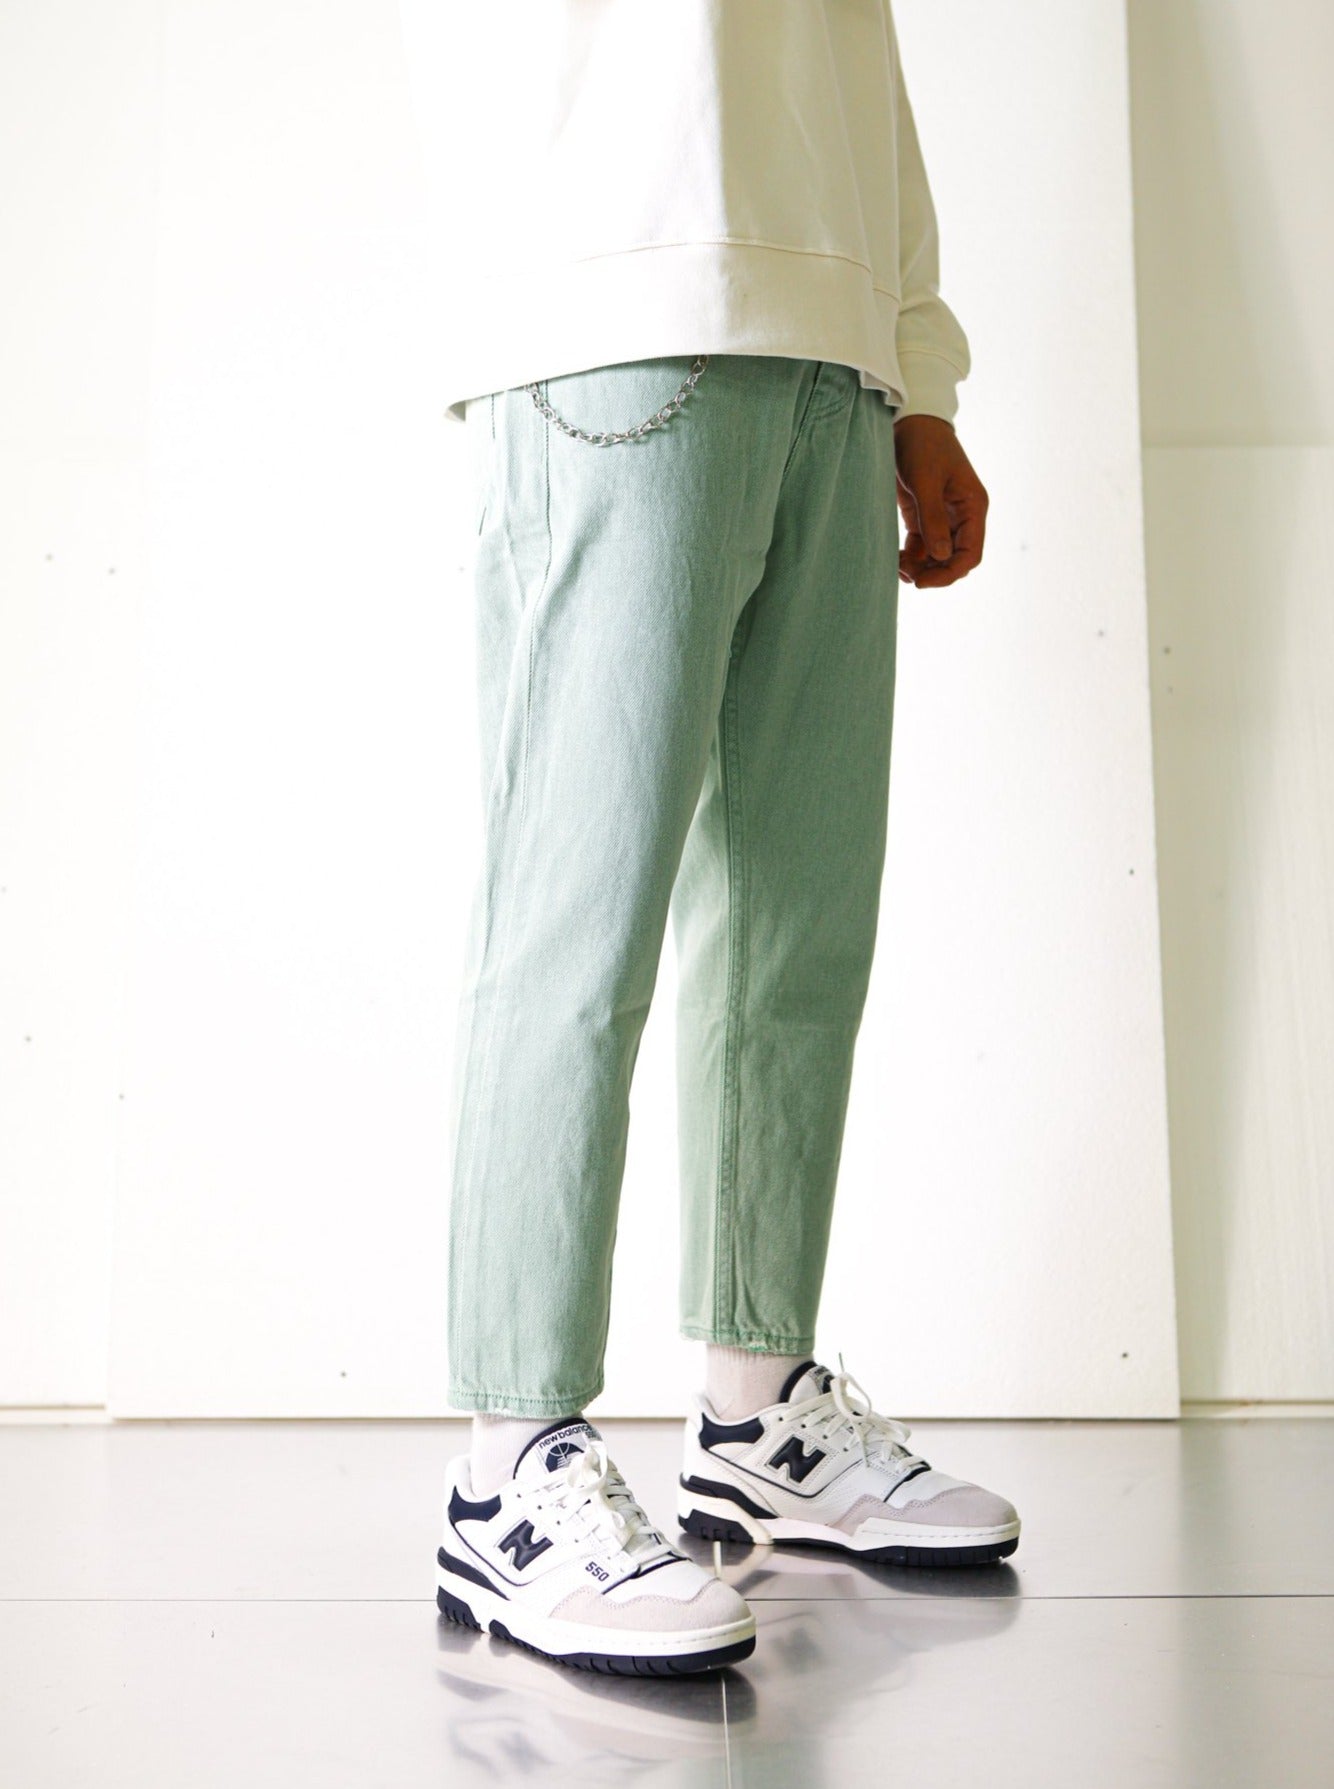 Relaxed Fit Premium Jeans - Mint